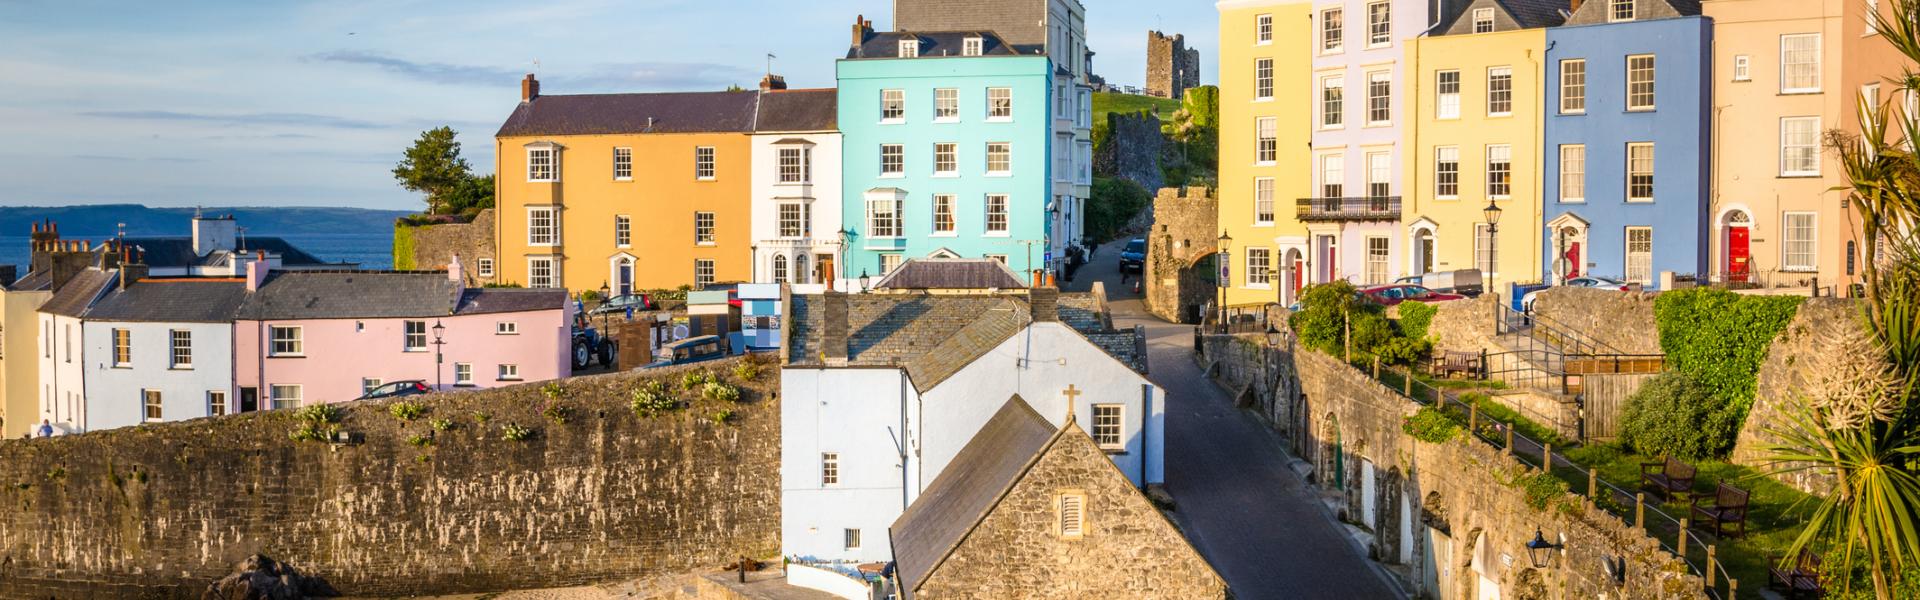 Tenby Cottages & Holiday Lettings - HomeToGo